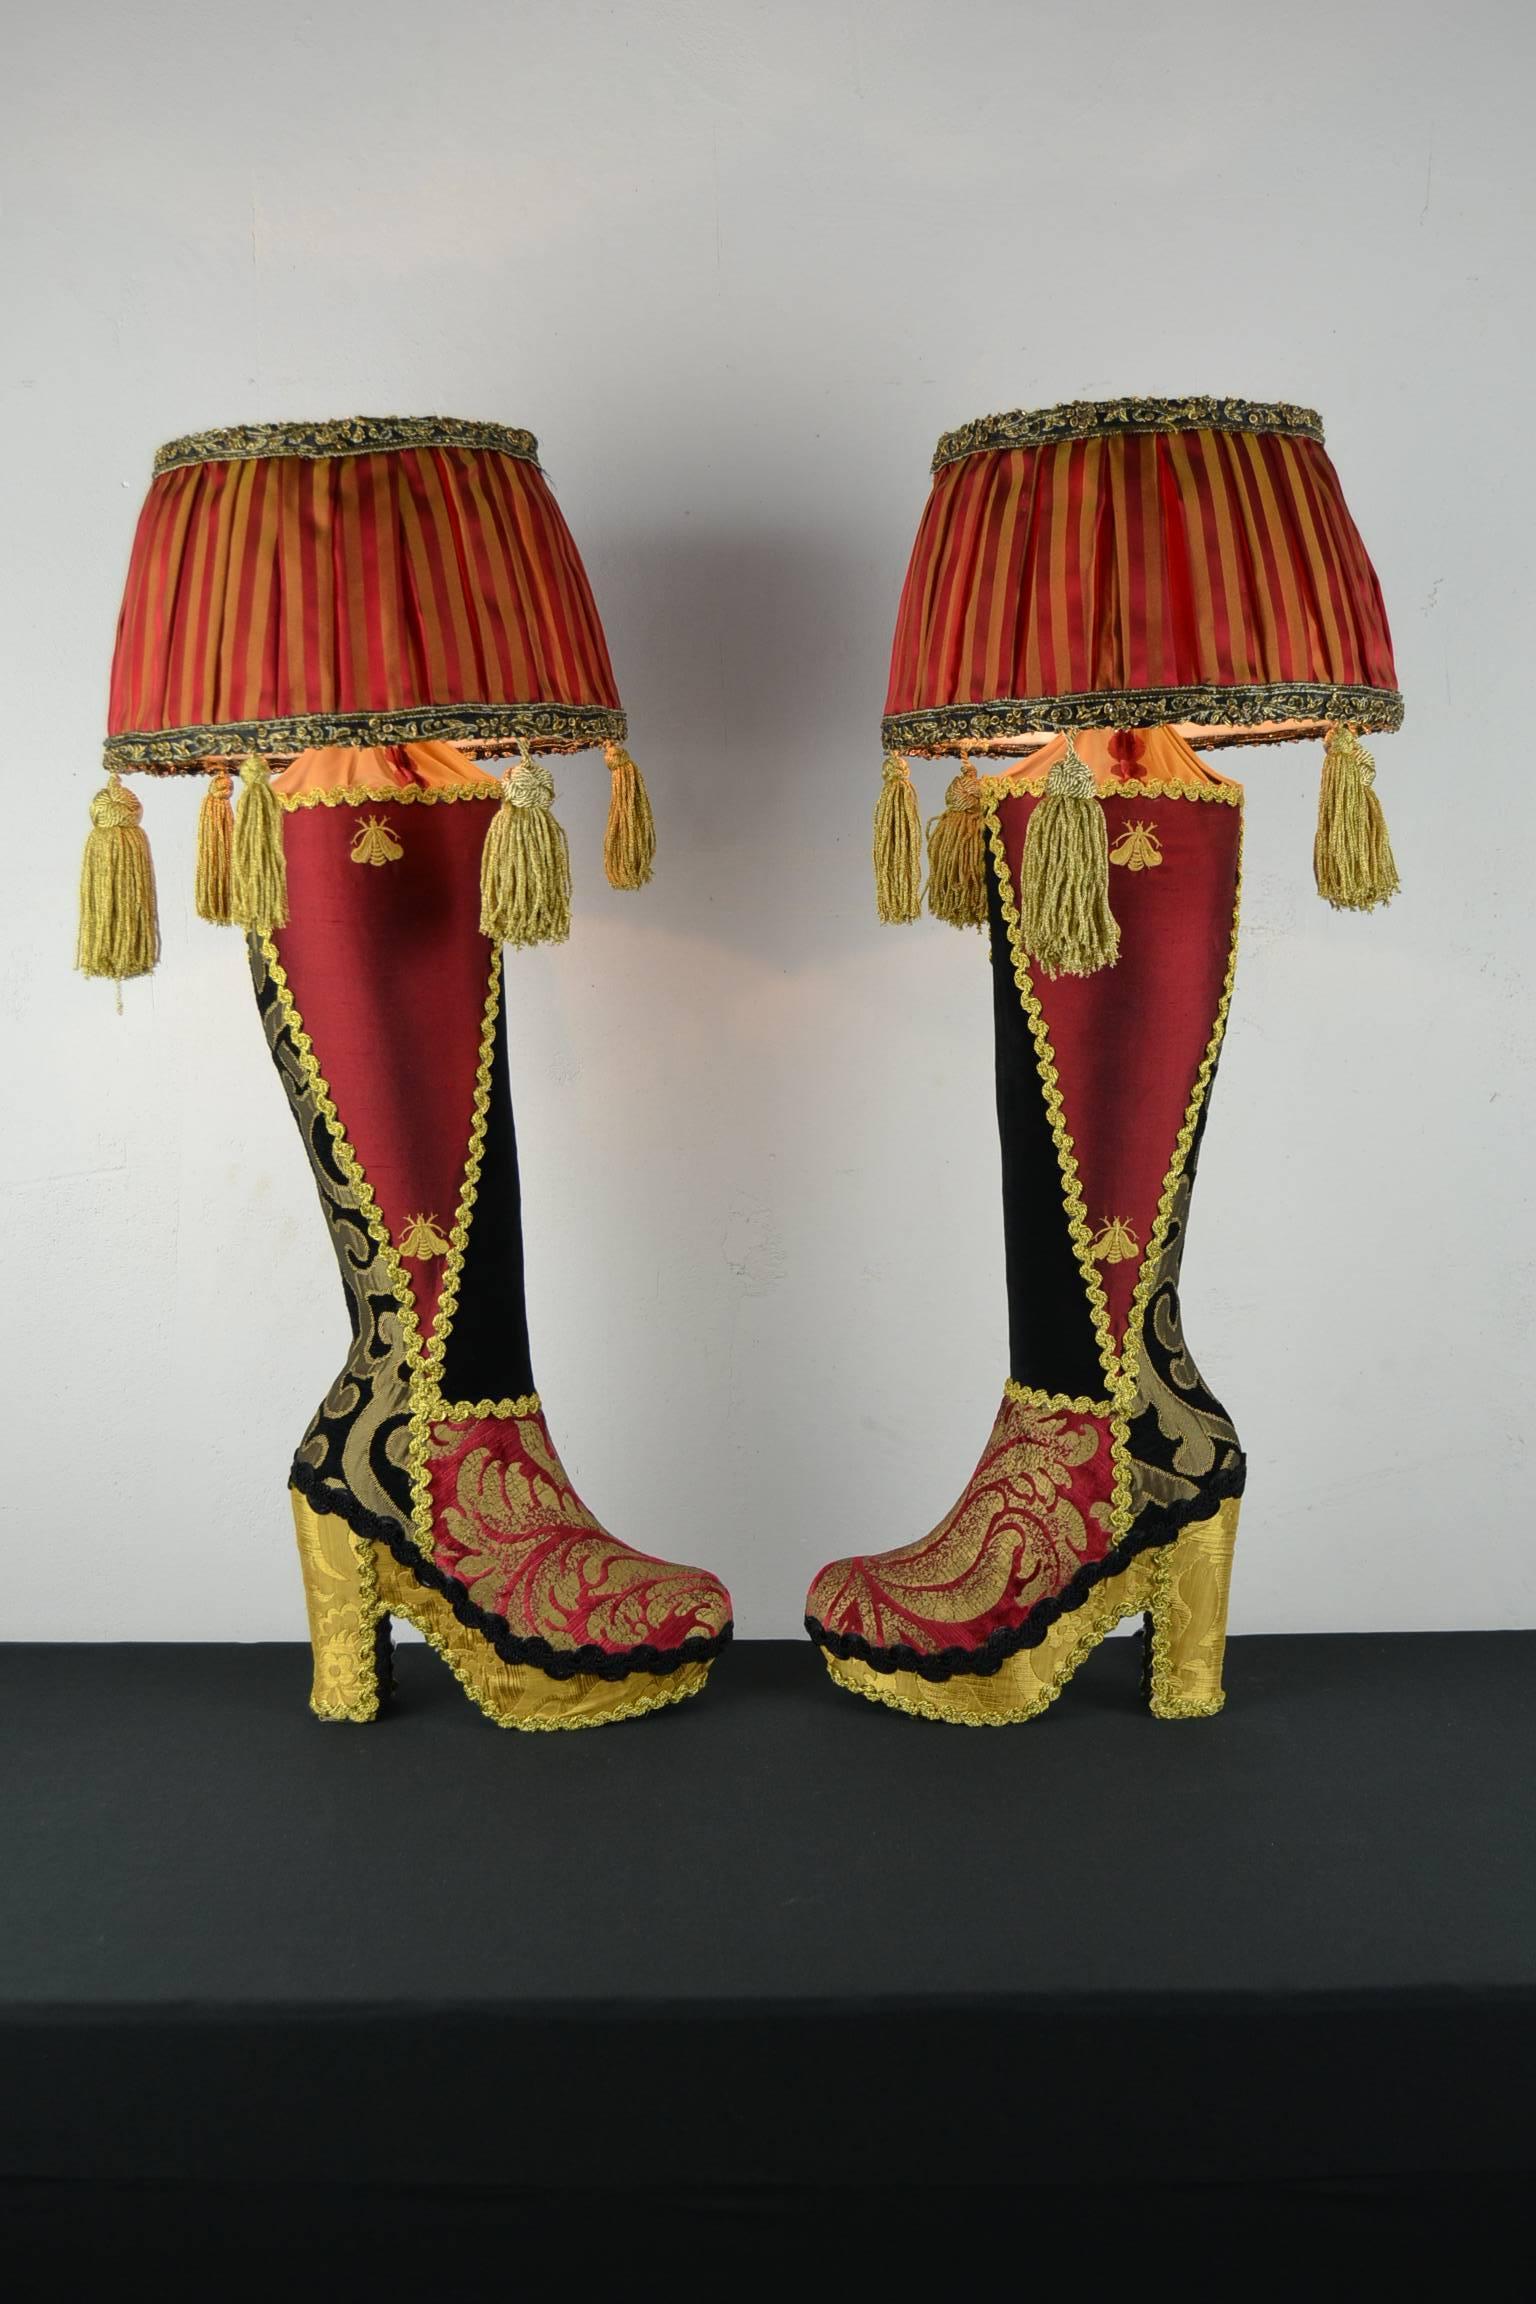 Contemporary Handmade High Heel Boots Table Lamps